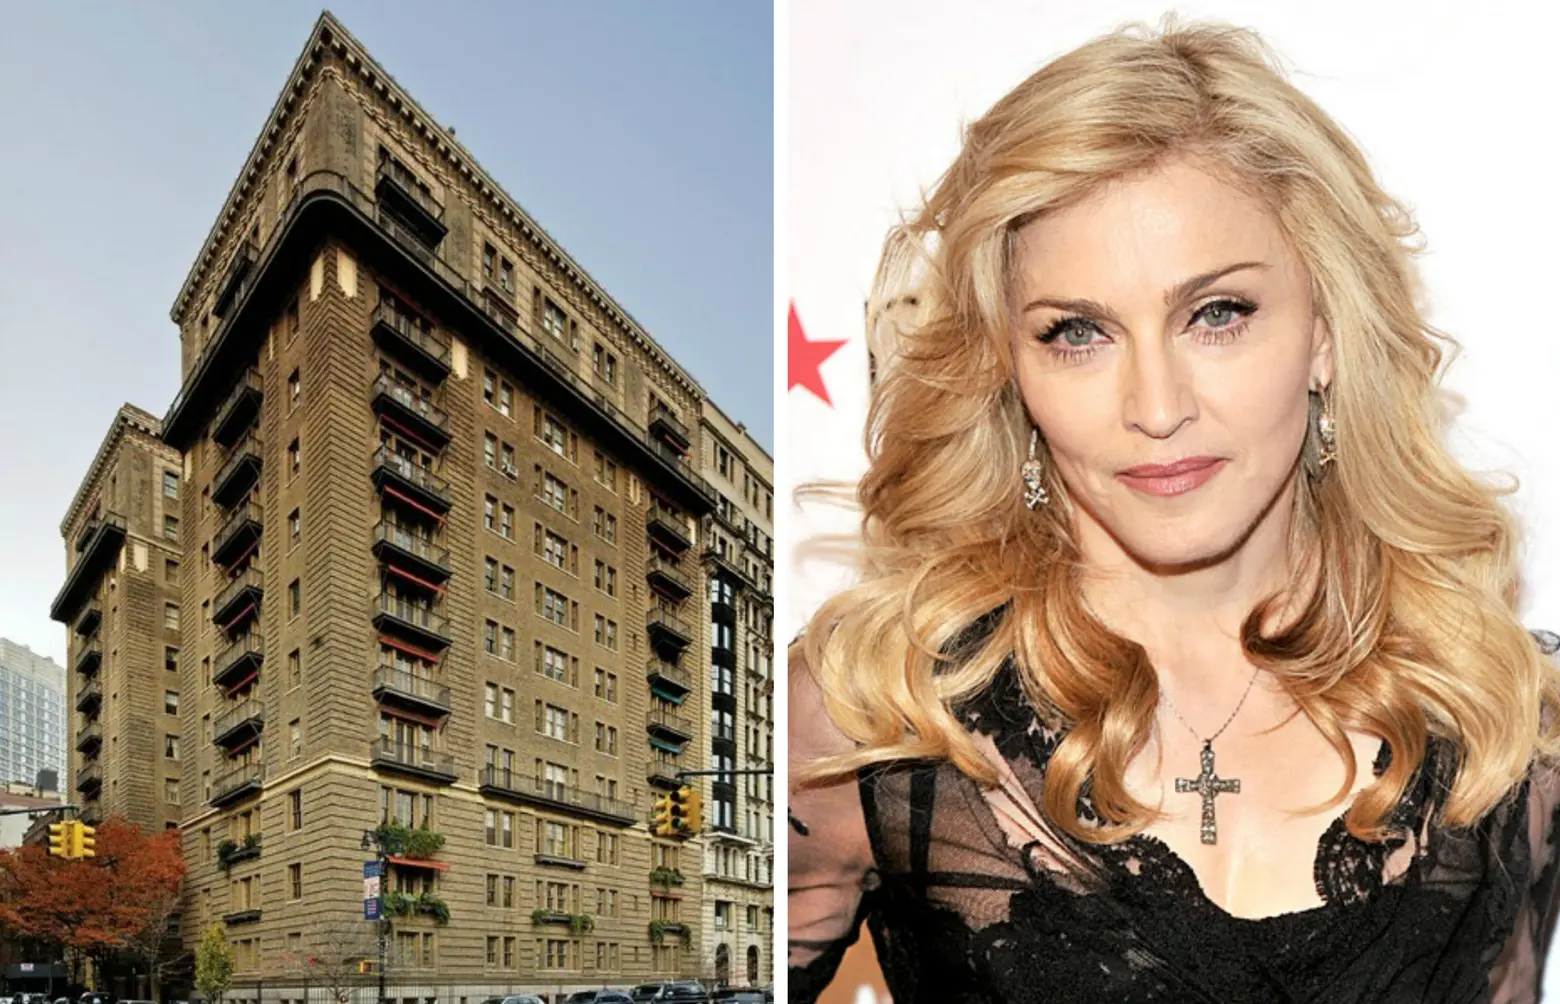 Madonna says in court papers that UWS co-op rules shouldn’t apply to her because she’s famous